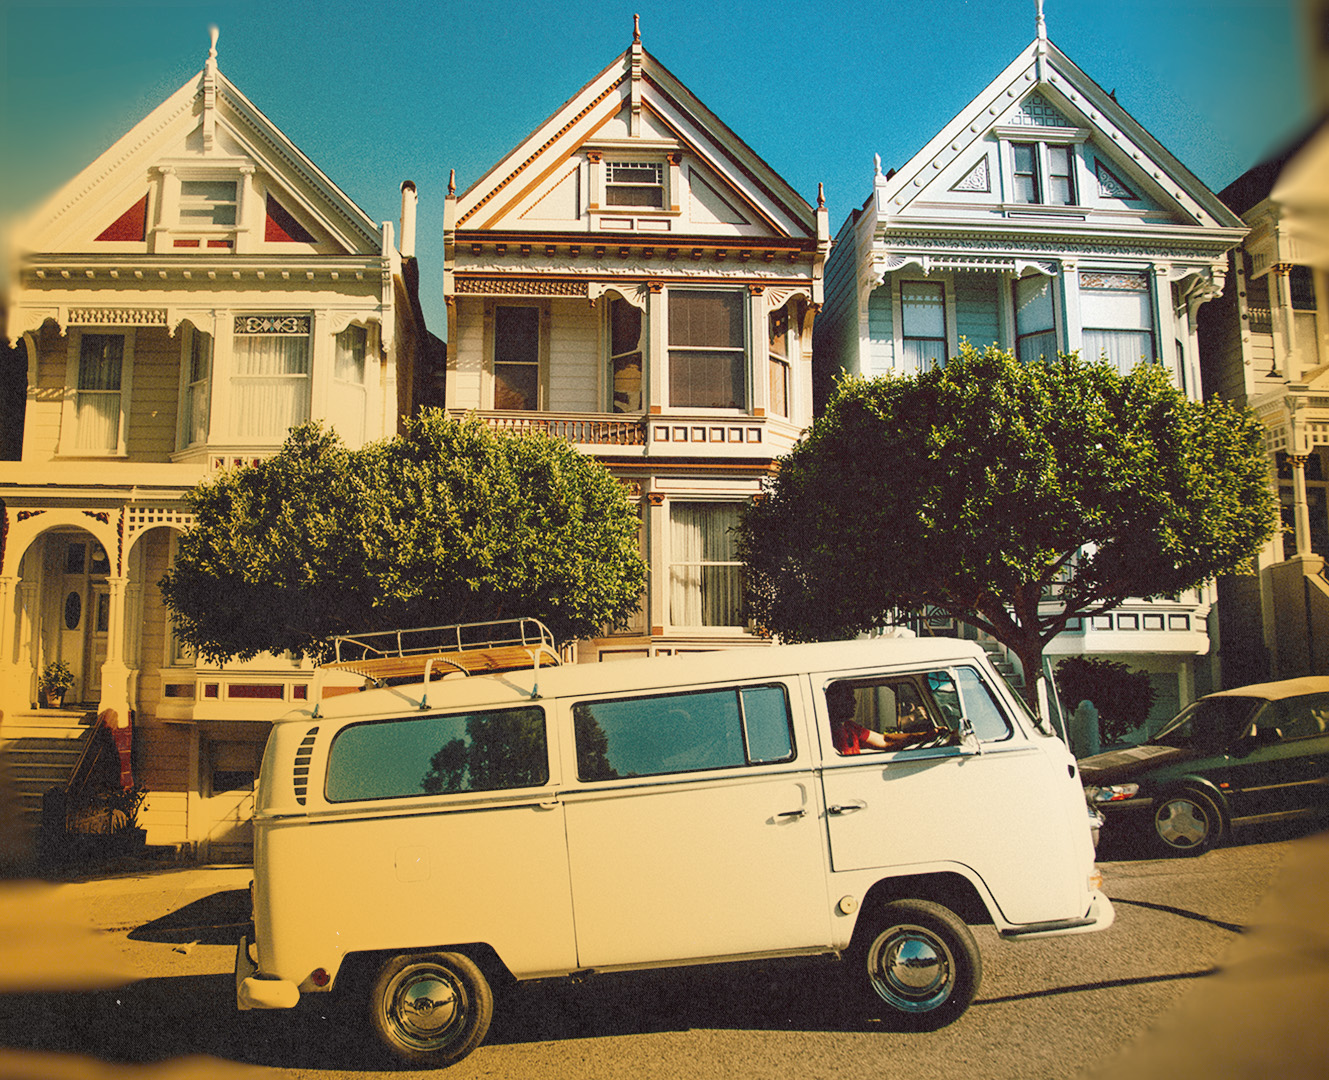 Tour Company Shows Off SF in a Fleet of VW Buses